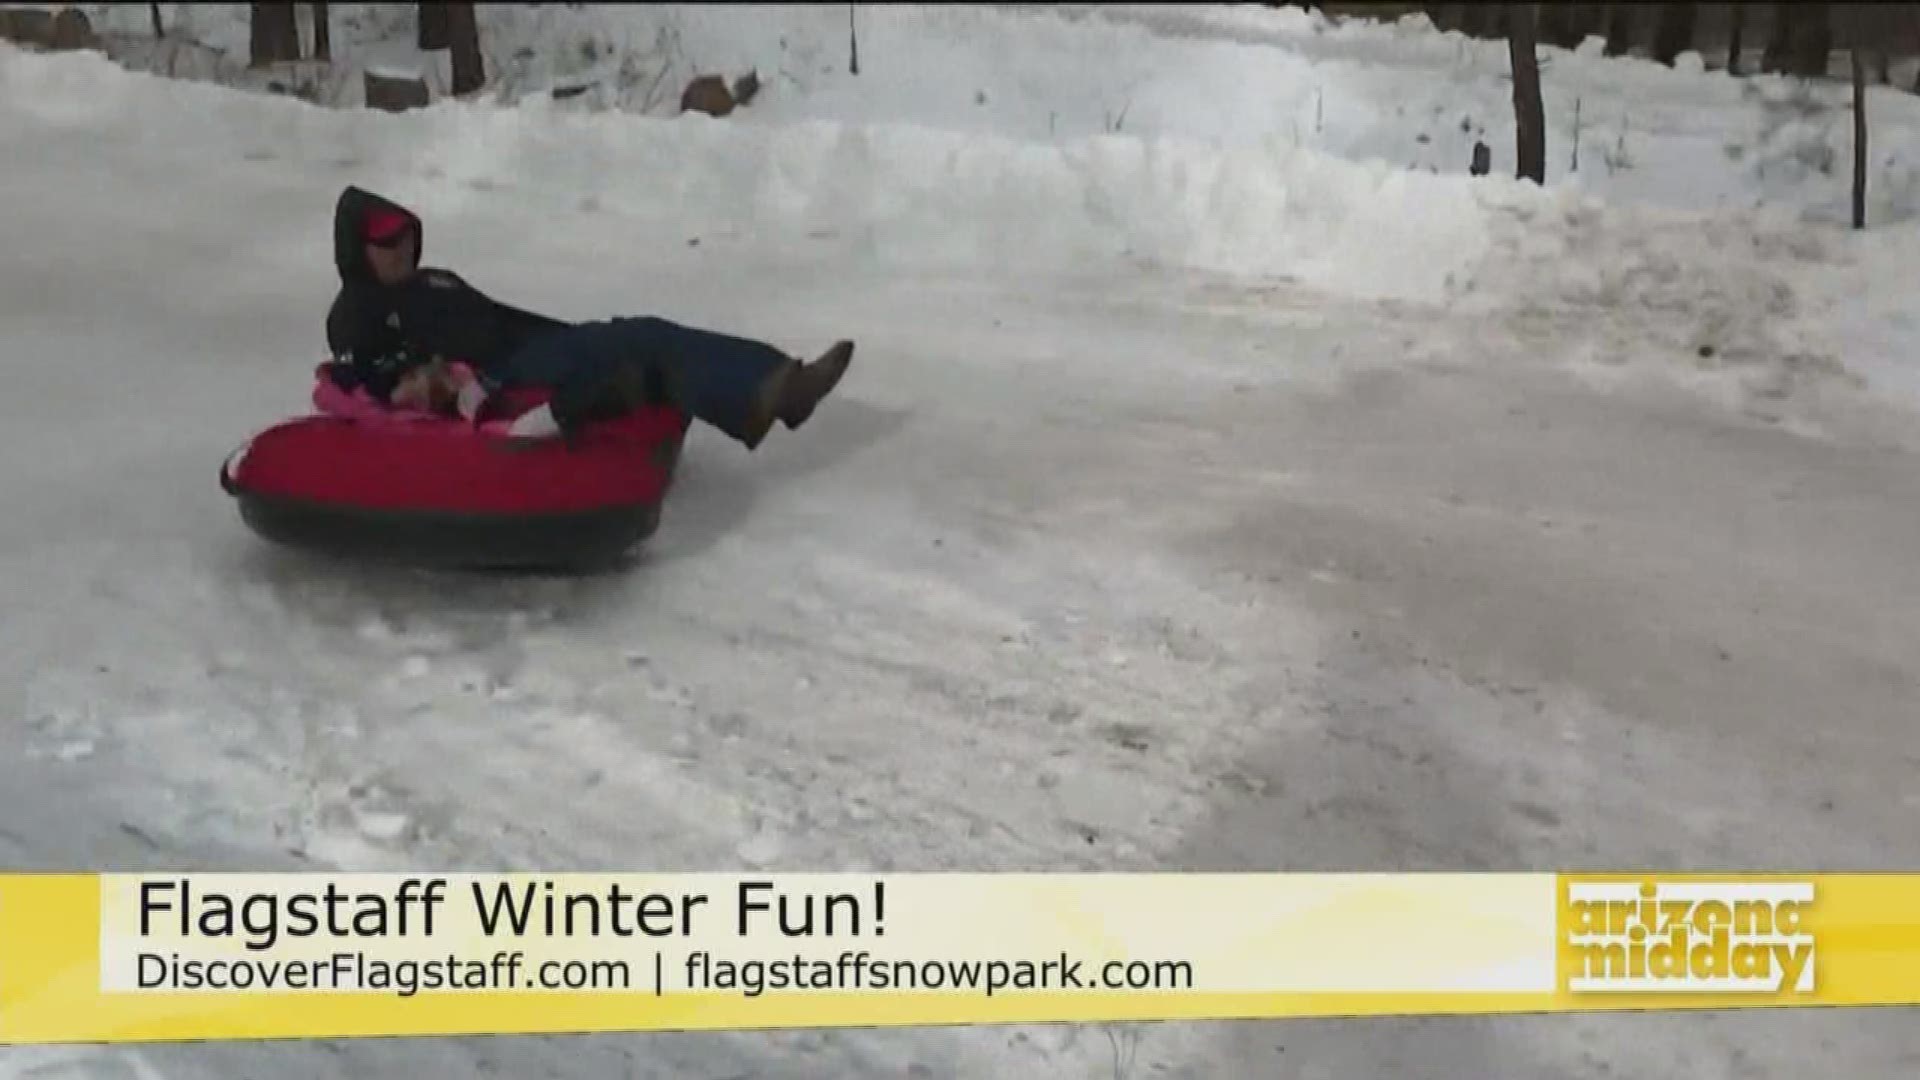 Lori Pappas with Discover Flagstaff, shows us the winter fun you can have at the Flagstaff Snow Park; from sledding, to tubing to building a snowman!